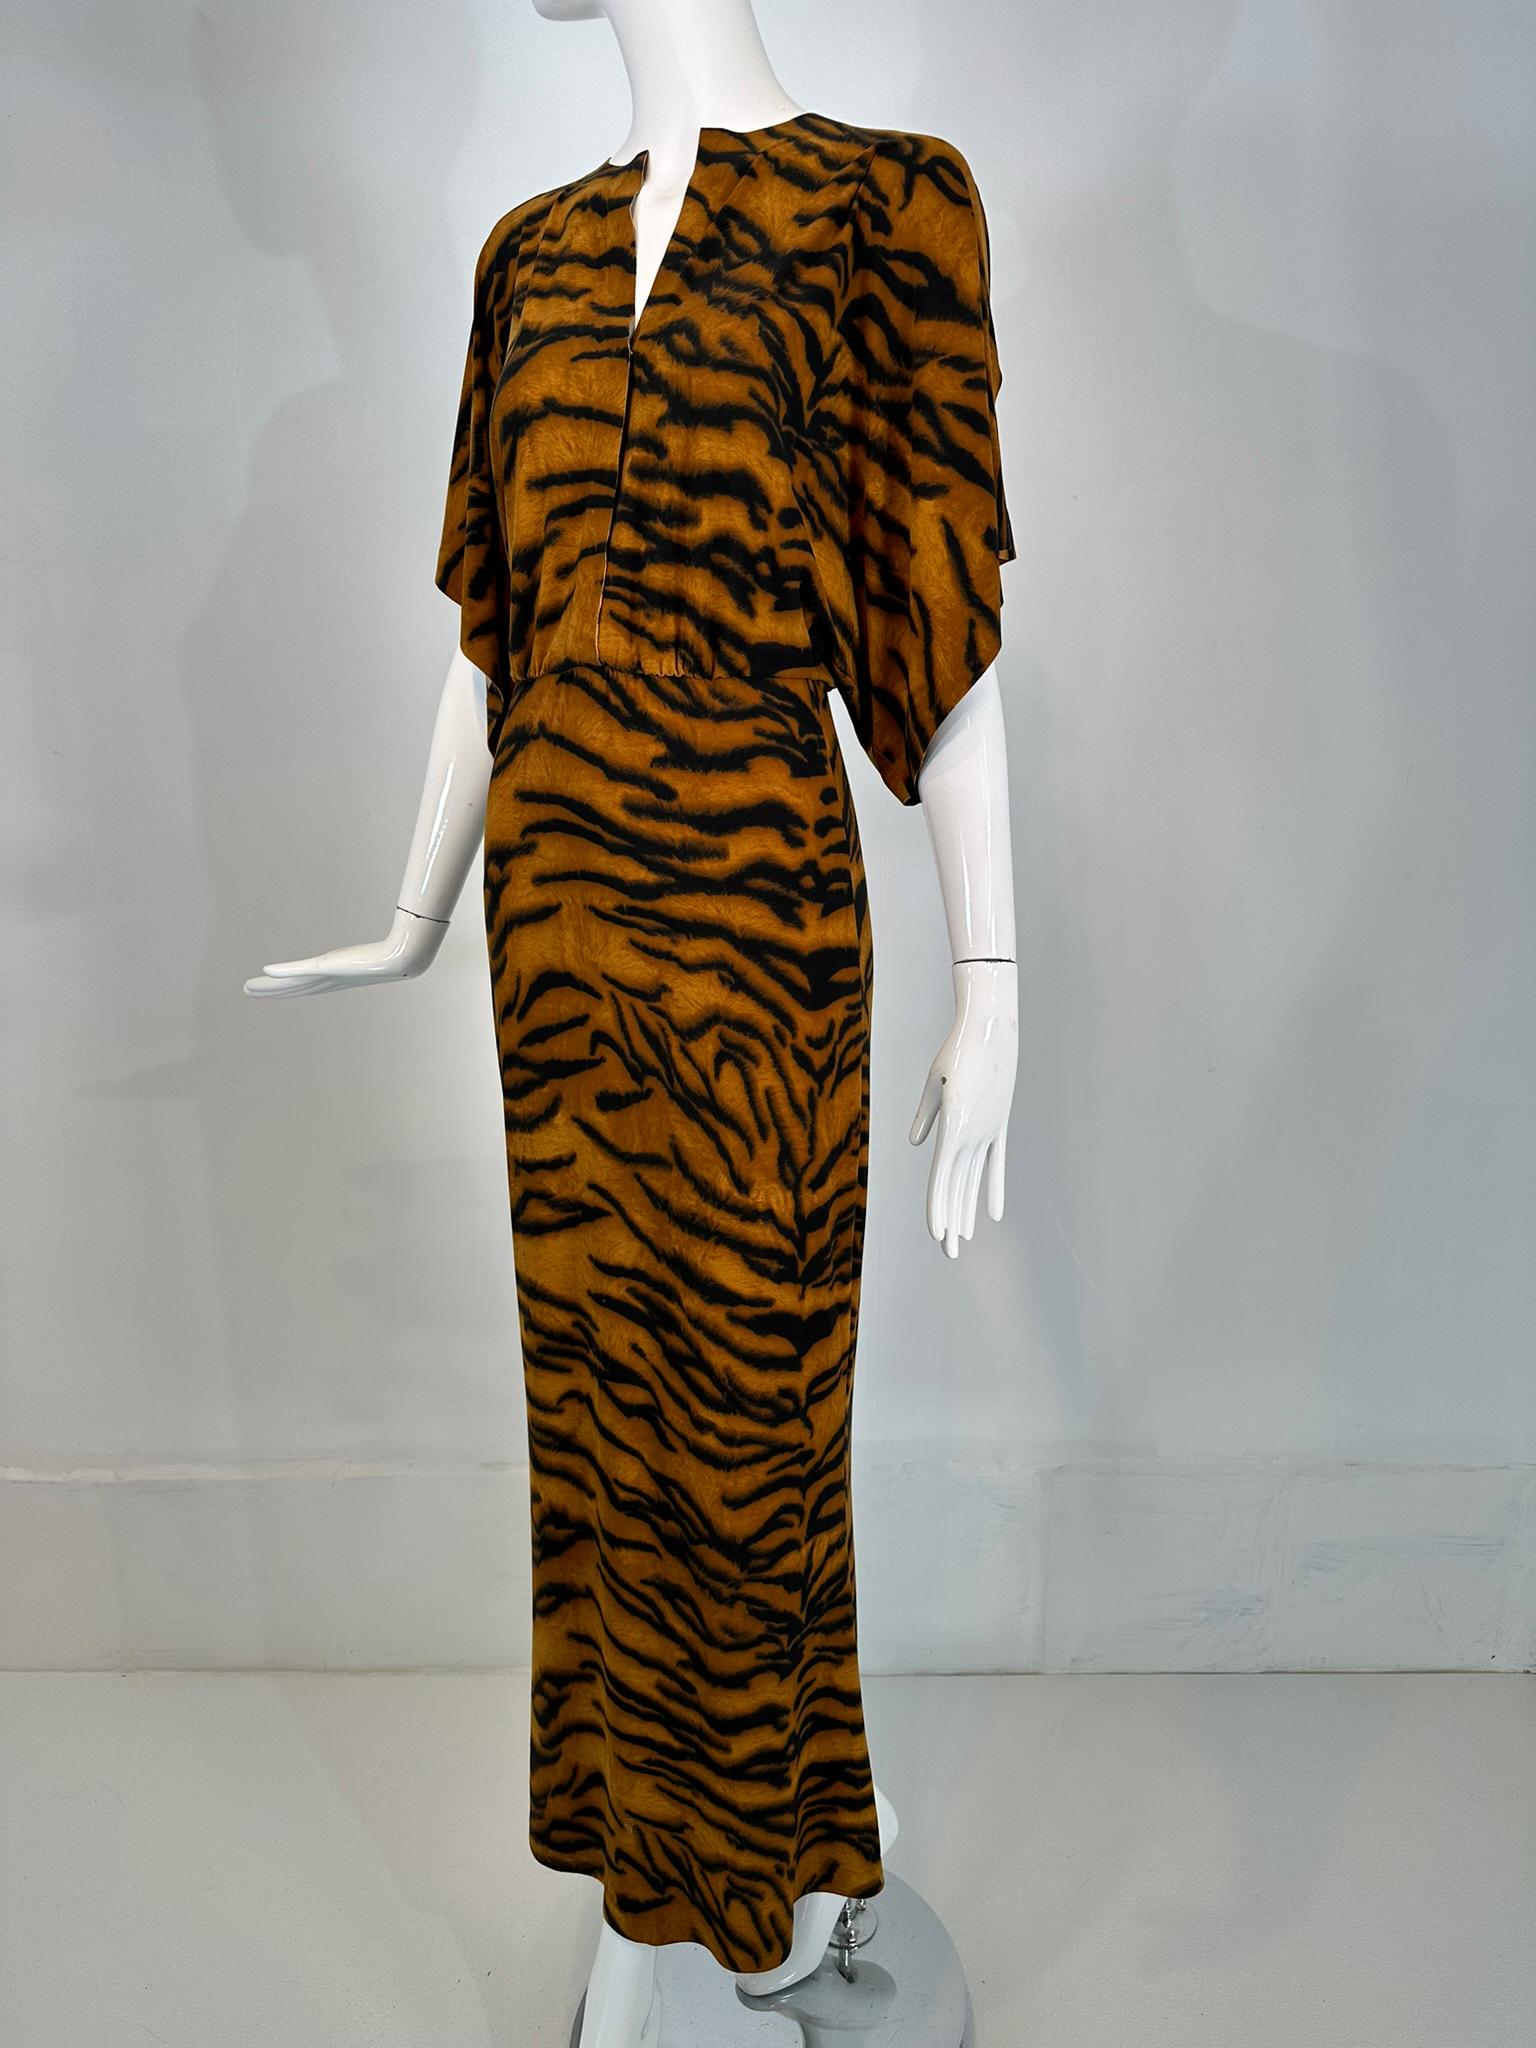 Norma Kamali Tiger Stripe Stretch Jersey Maxi Dress 34 In Good Condition For Sale In West Palm Beach, FL